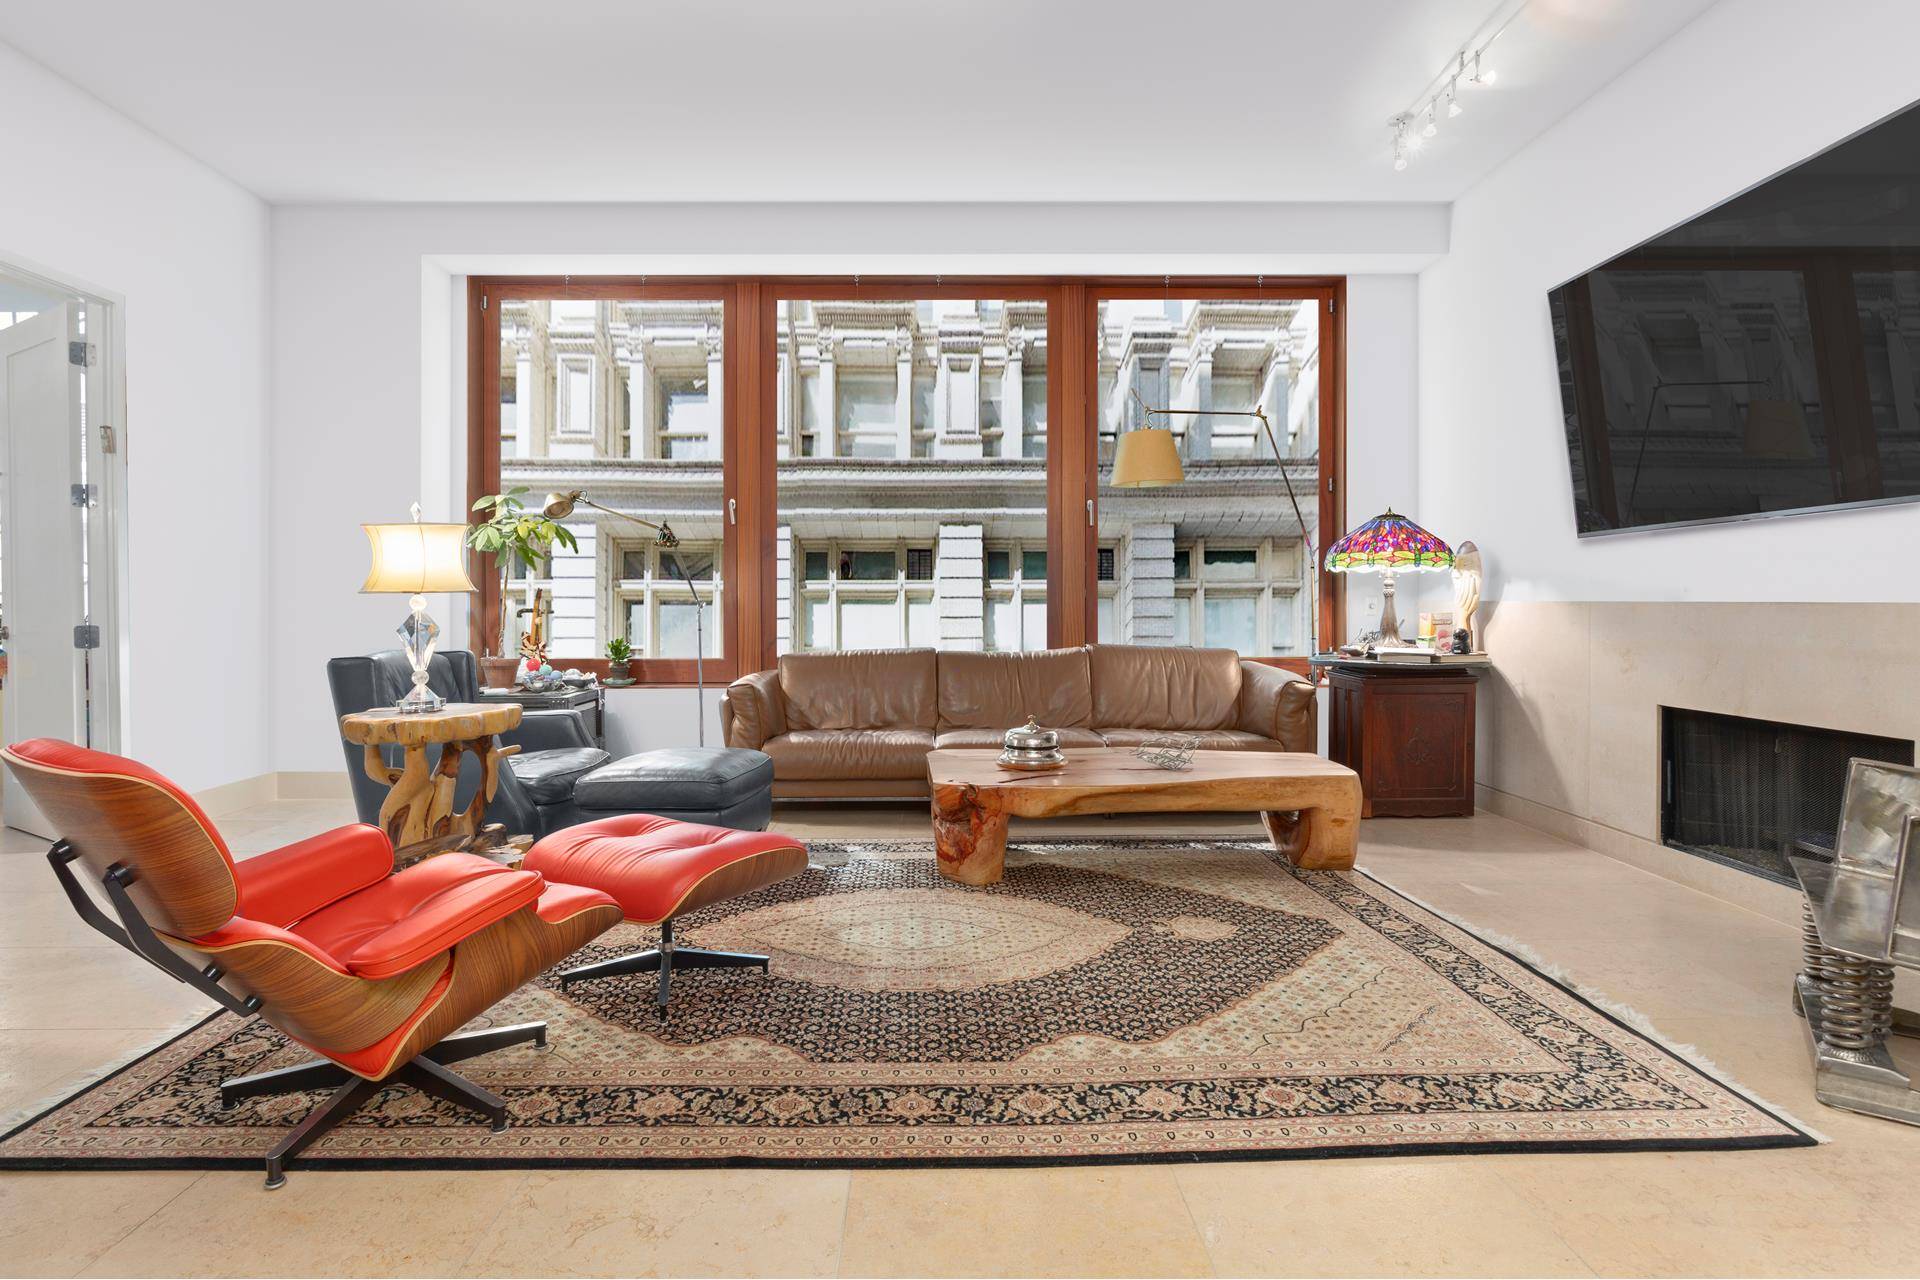 Located at the crossroads of Flatiron and Chelsea, this expansive 3 bedroom 2.